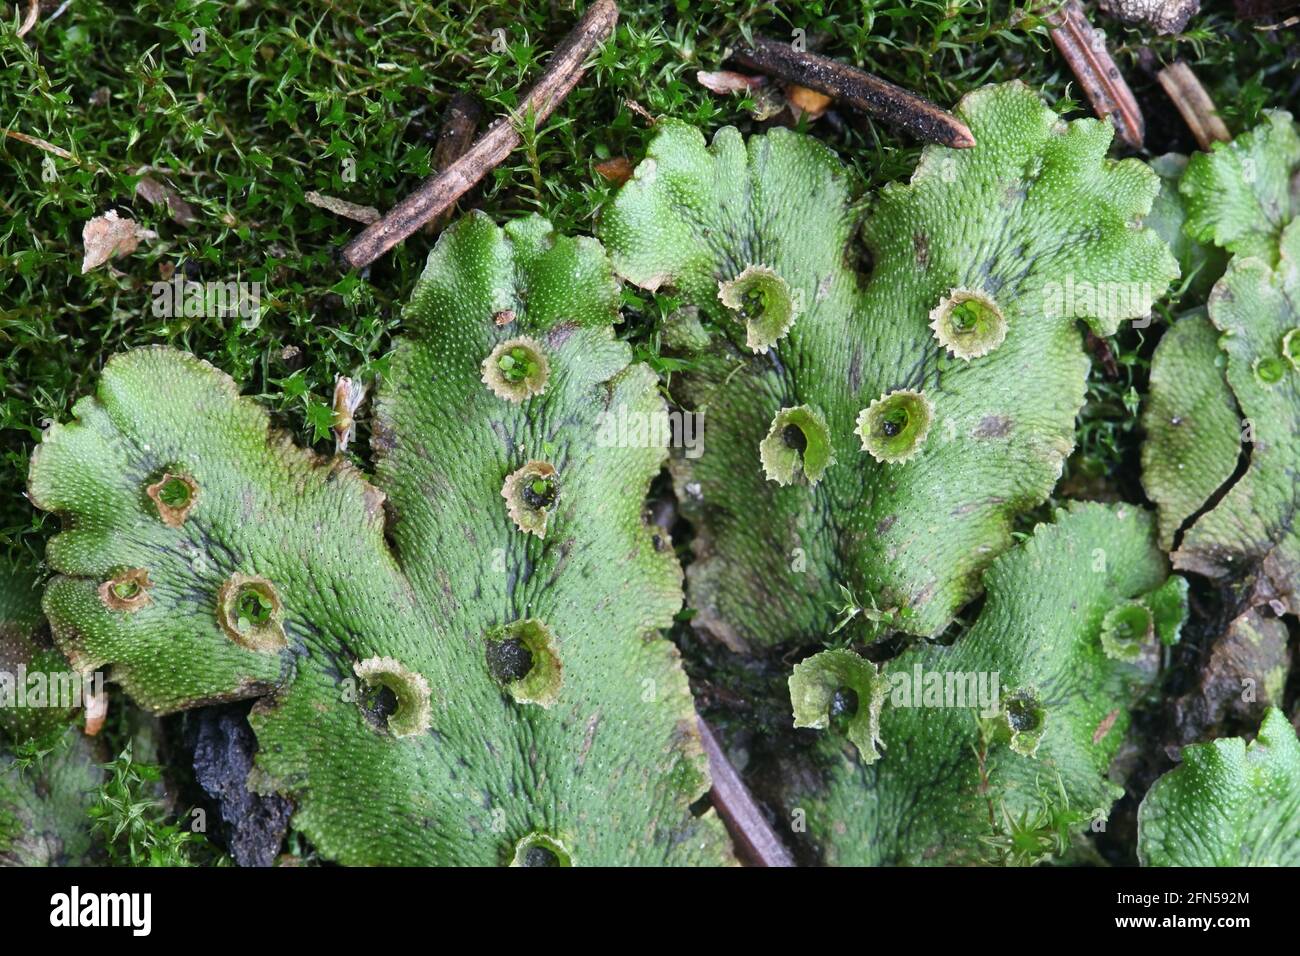 Marchantia polymorpha ssp ruderalis, known as the common liverwort or umbrella liverwort, growing on a forest fire area in Finland Stock Photo